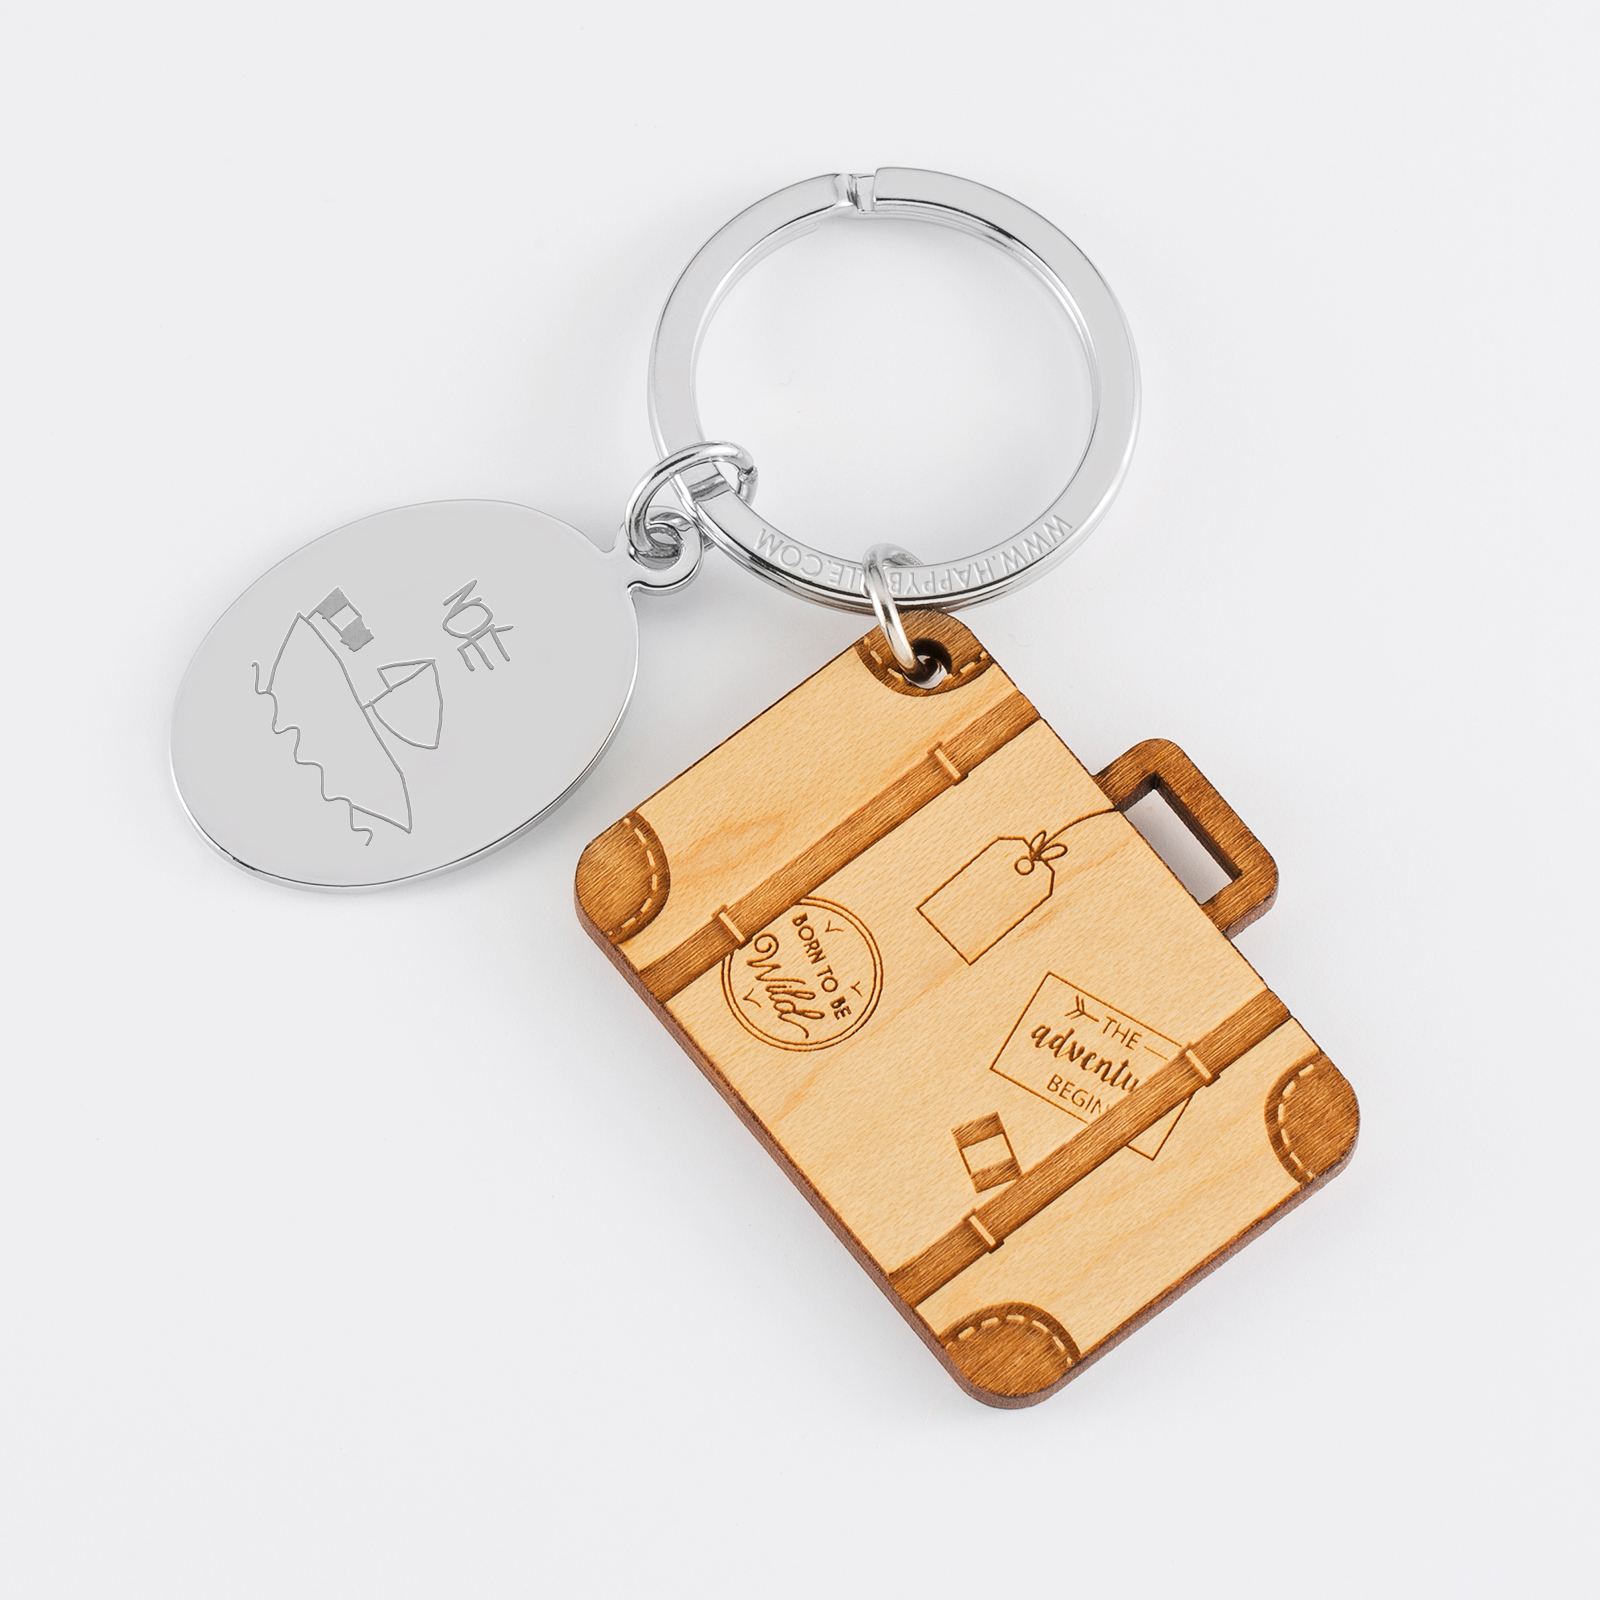 Personalised engraved oval steel medallion and wooden suitcase charm keyring - sketch